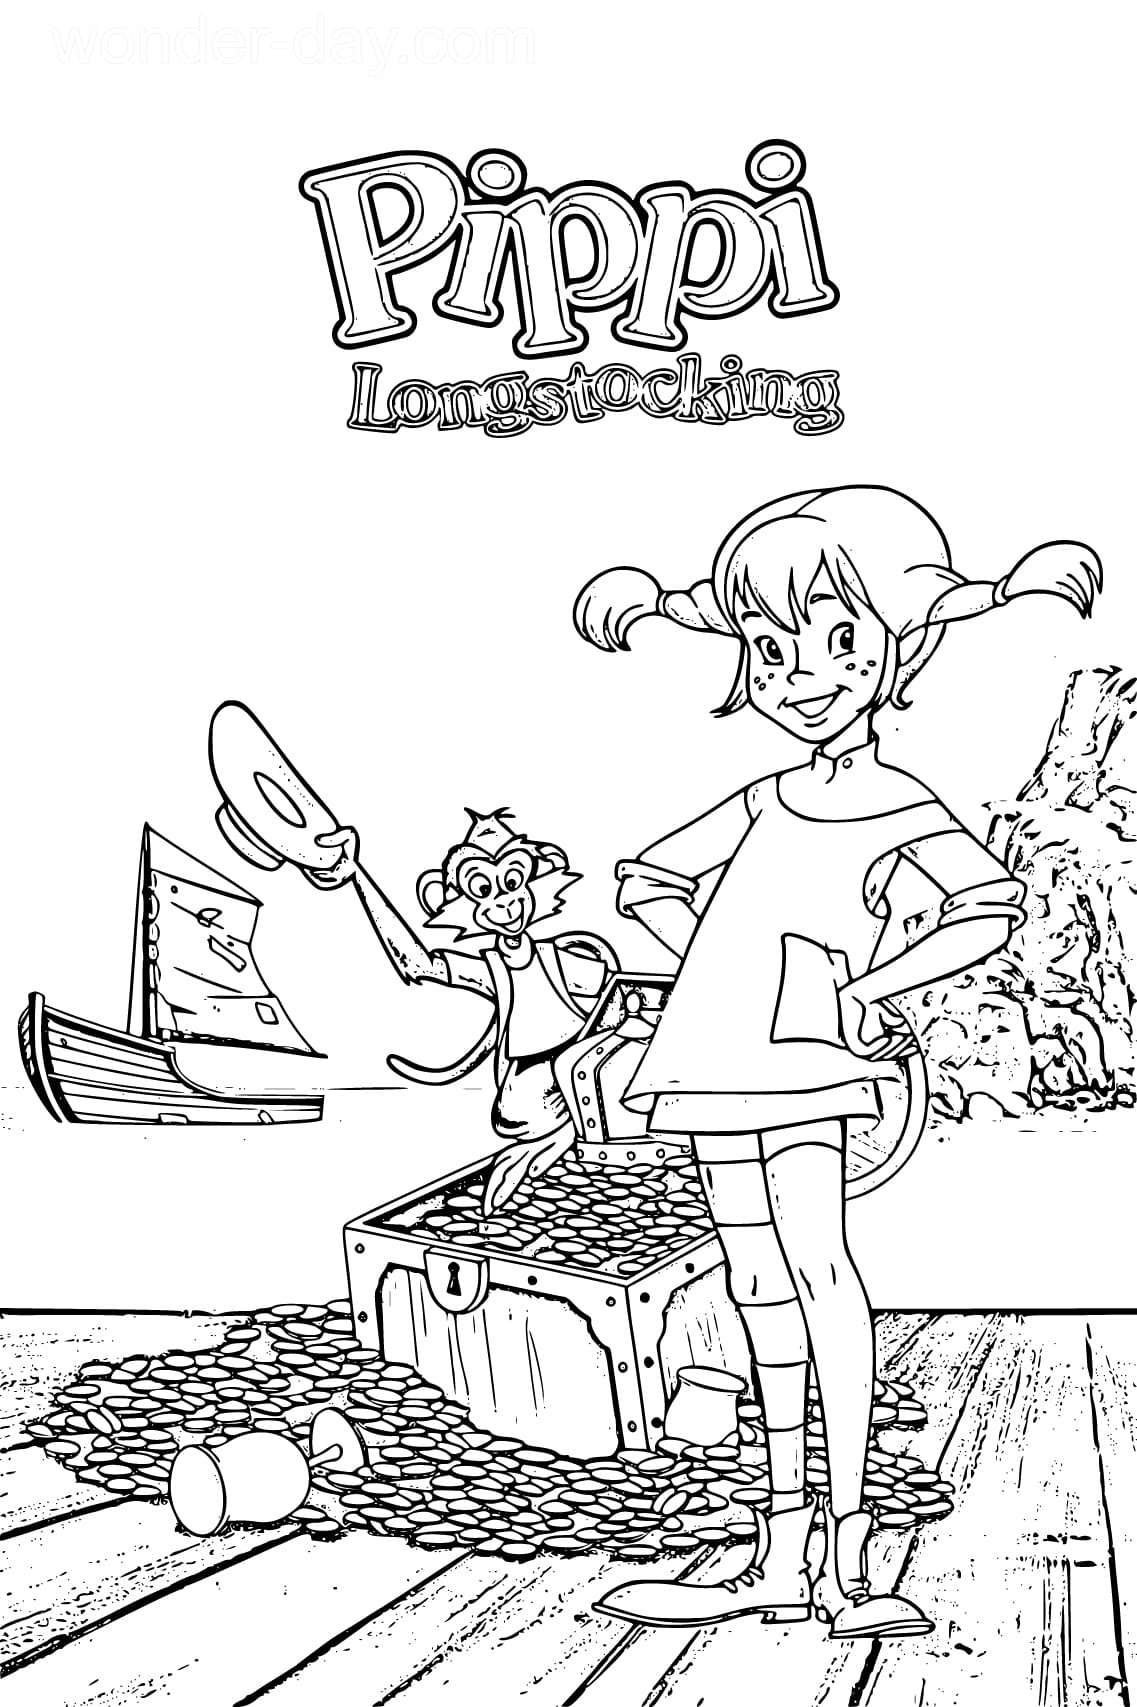 Pippi Longstocking Coloring Pages | WONDER DAY — Coloring pages for  children and adults